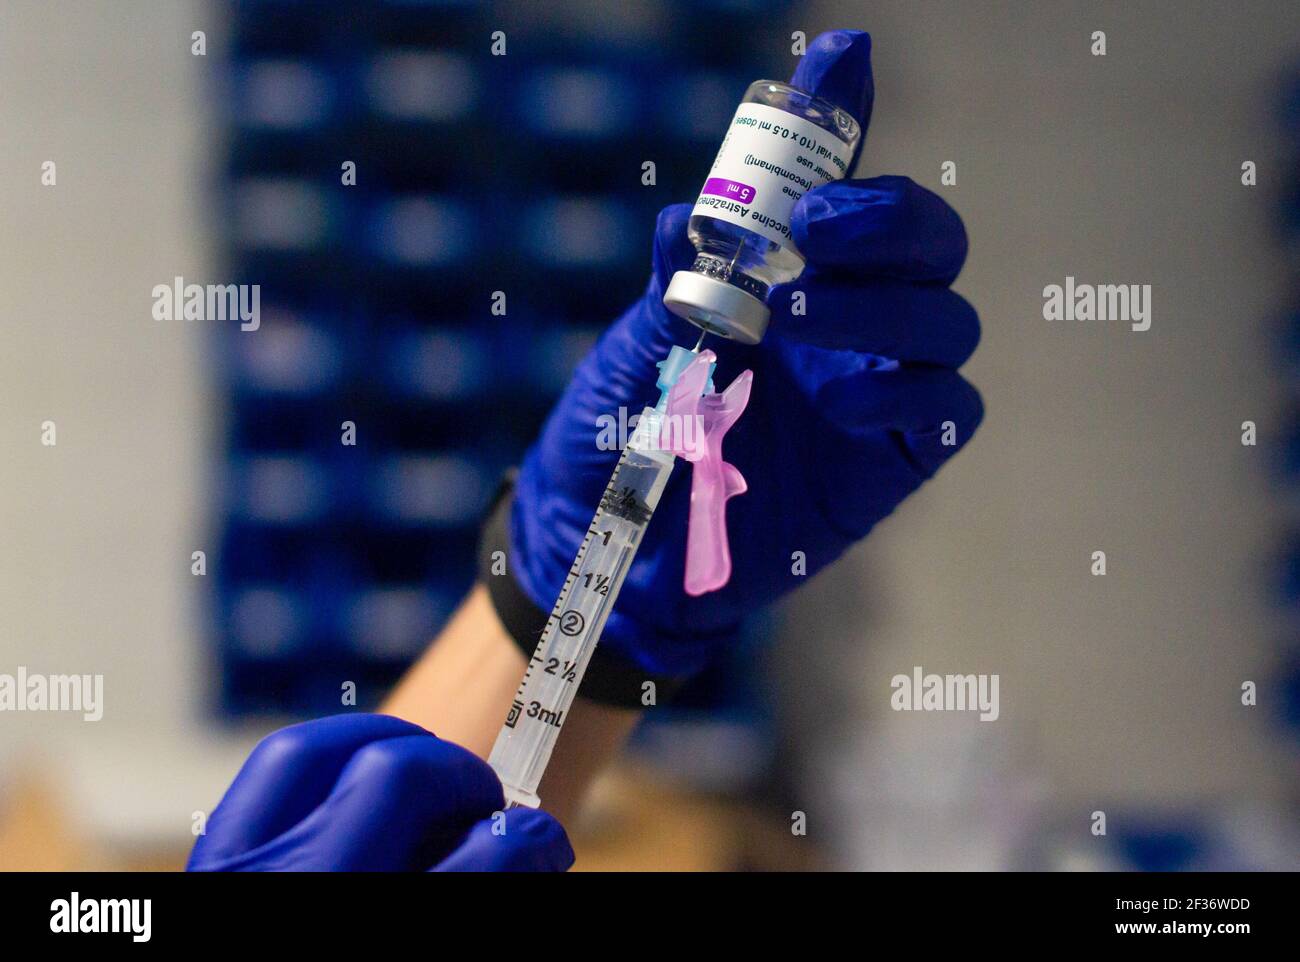 A healthcare worker prepares a syringe with the Astra Zeneca Covid19 dose at Coria City Hospital. Some European countries have cancelled the administration of AstraZeneca vaccine due the appearance of some side effects in people who had received it recently. Stock Photo